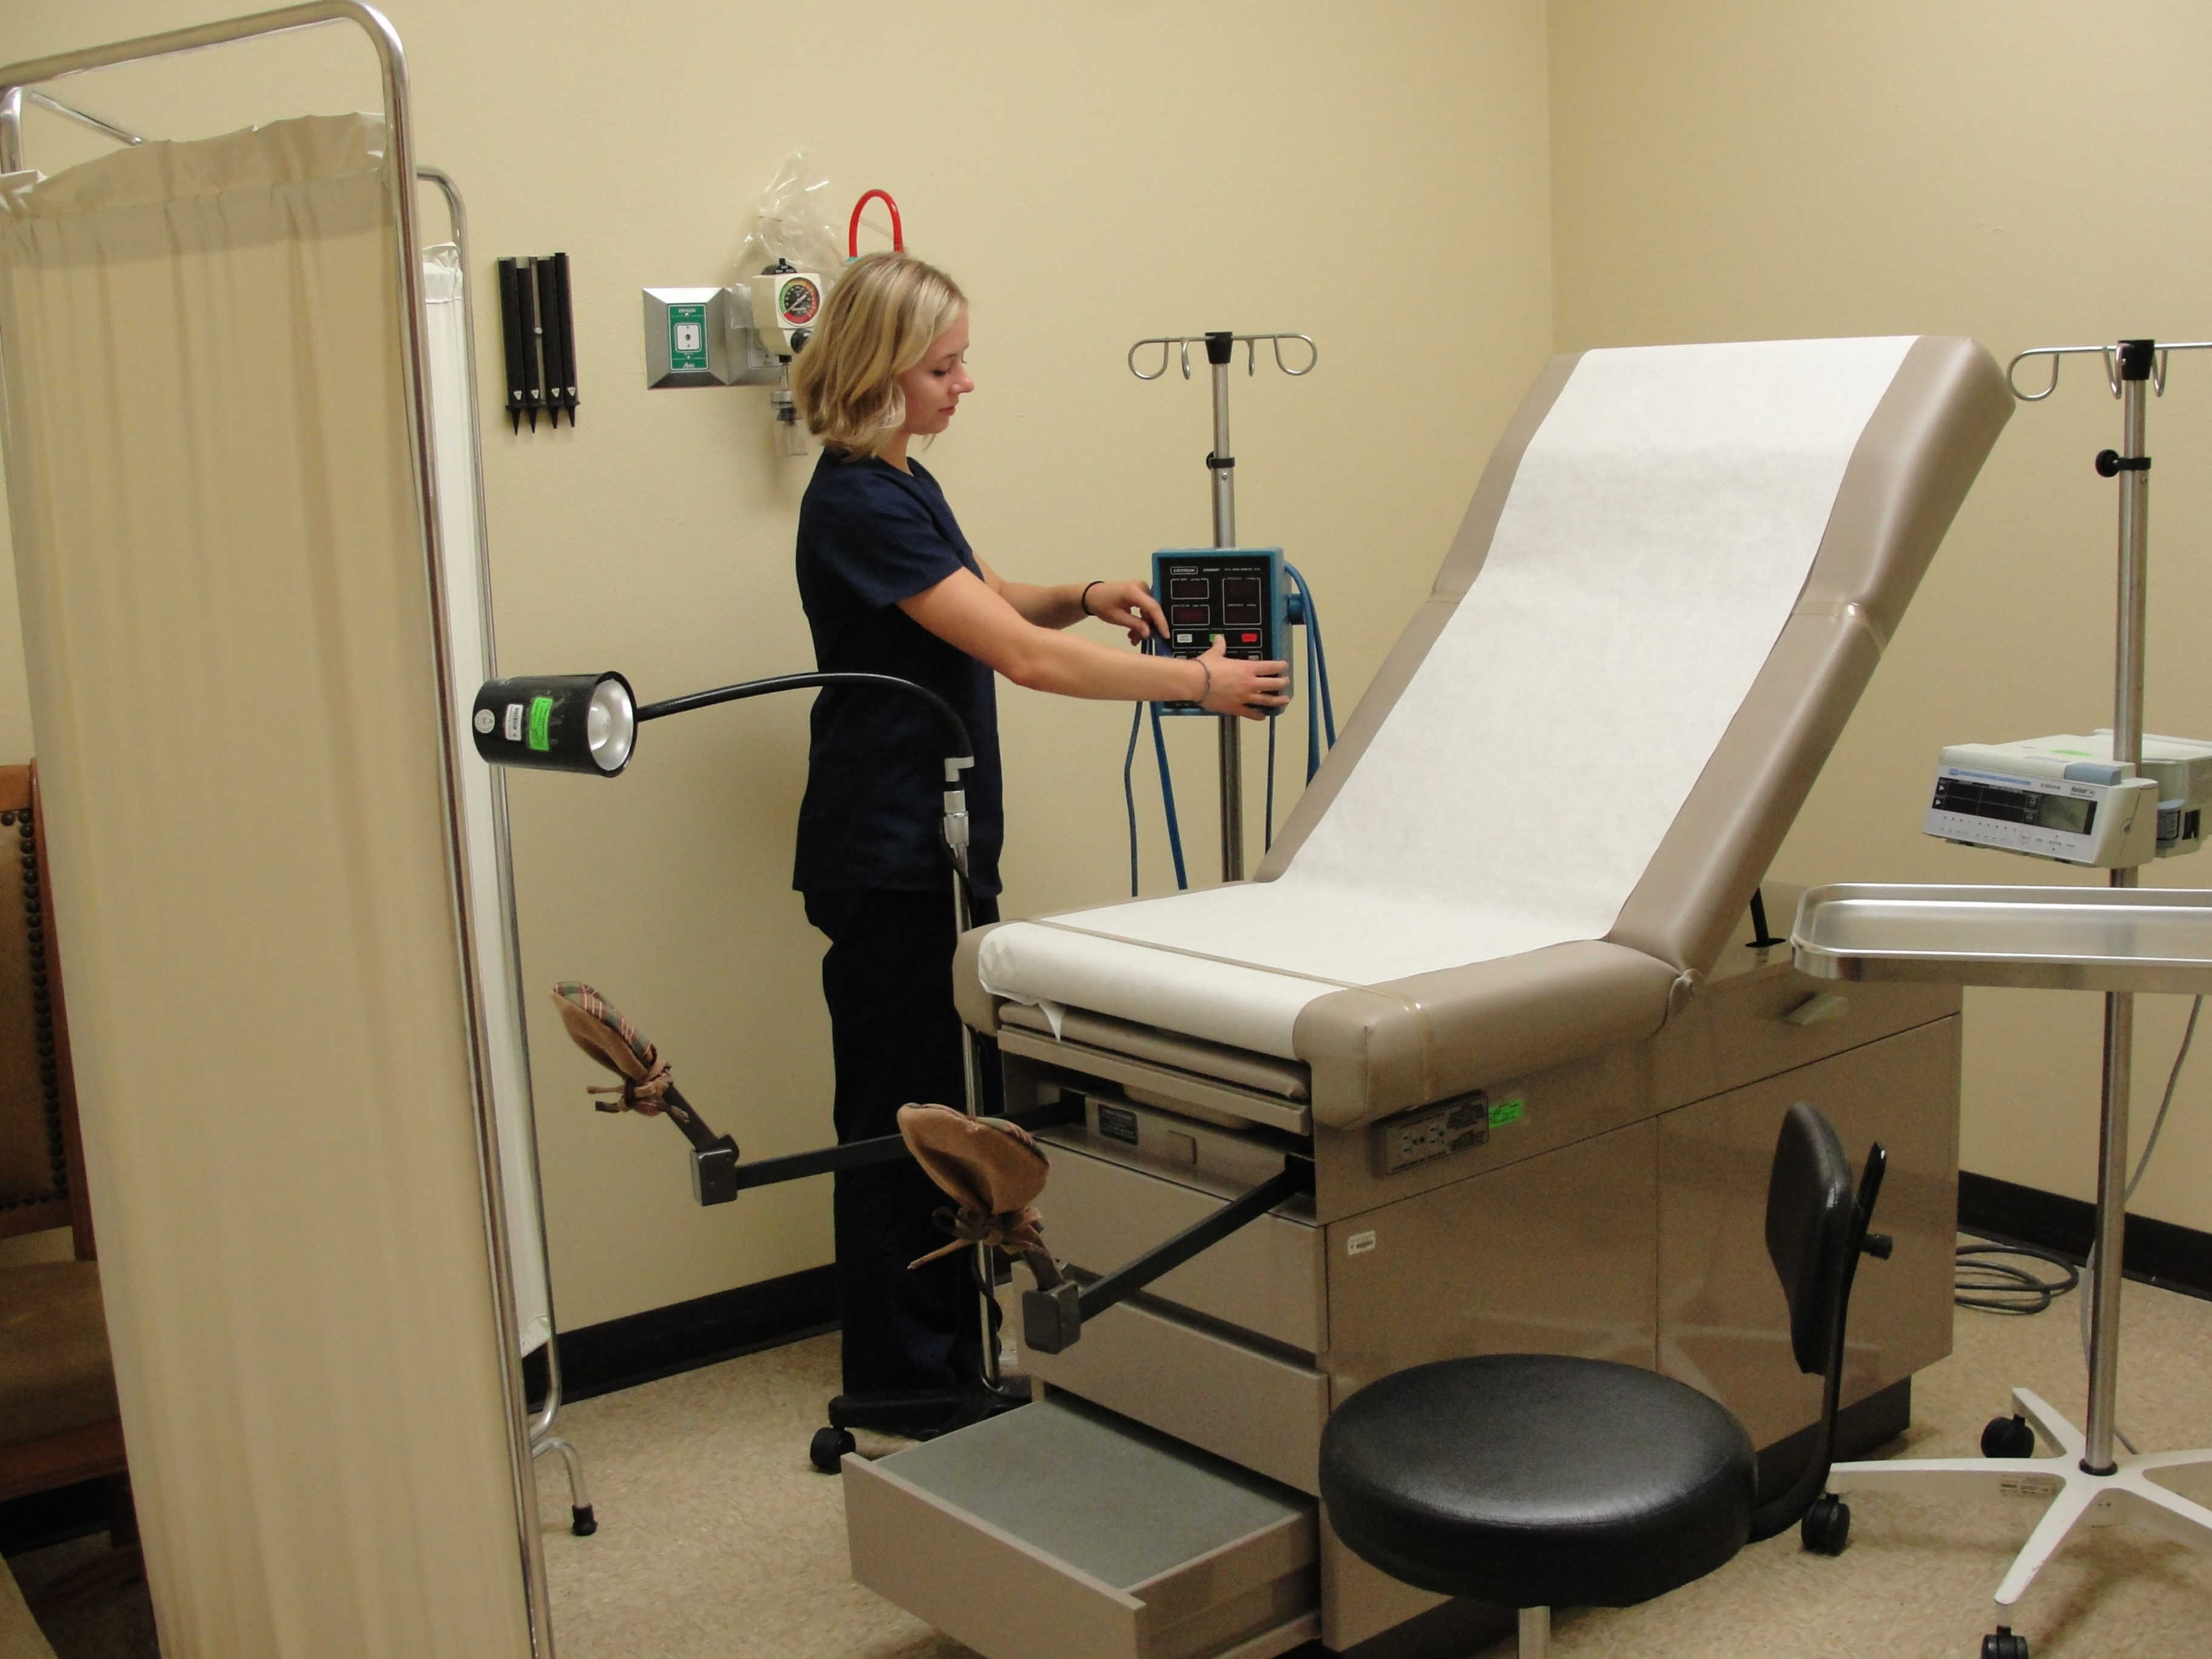 Gyn diagnosis and treatment area